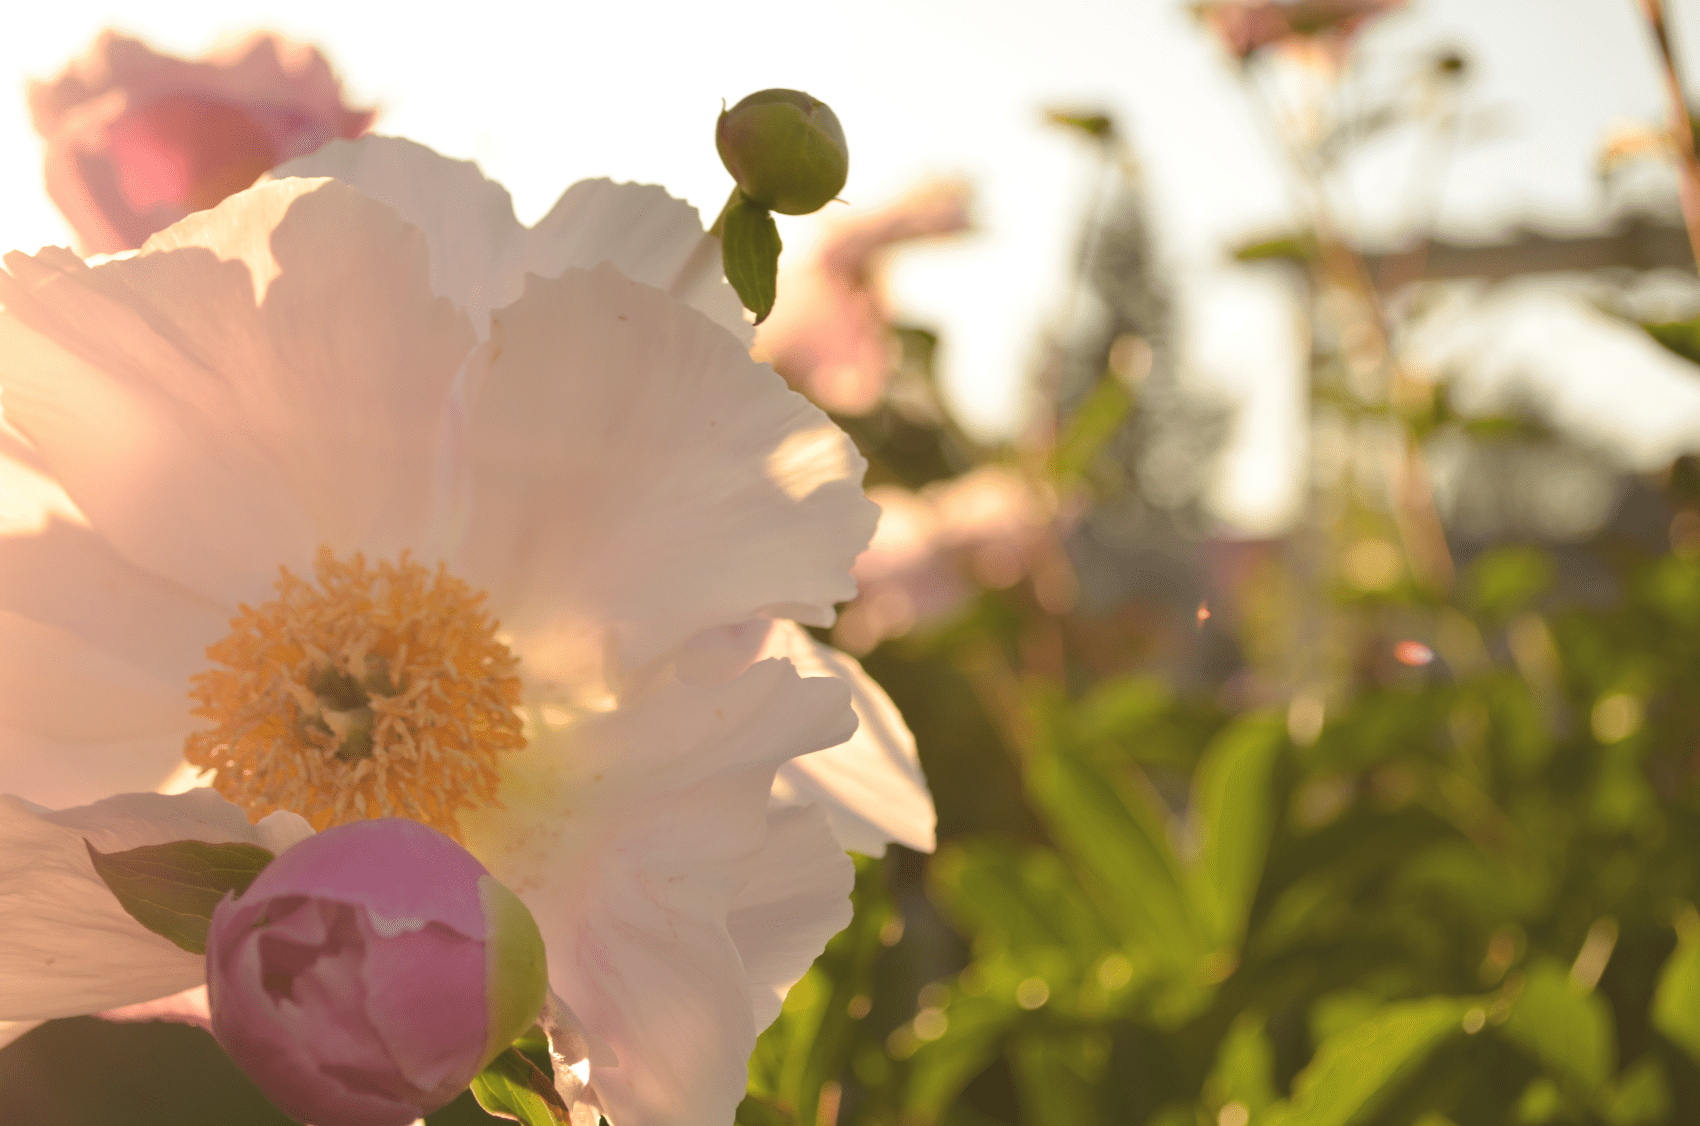 A close up of a soft pink peony shows off the suns warmth through it's petals while lively green leaves in the background.